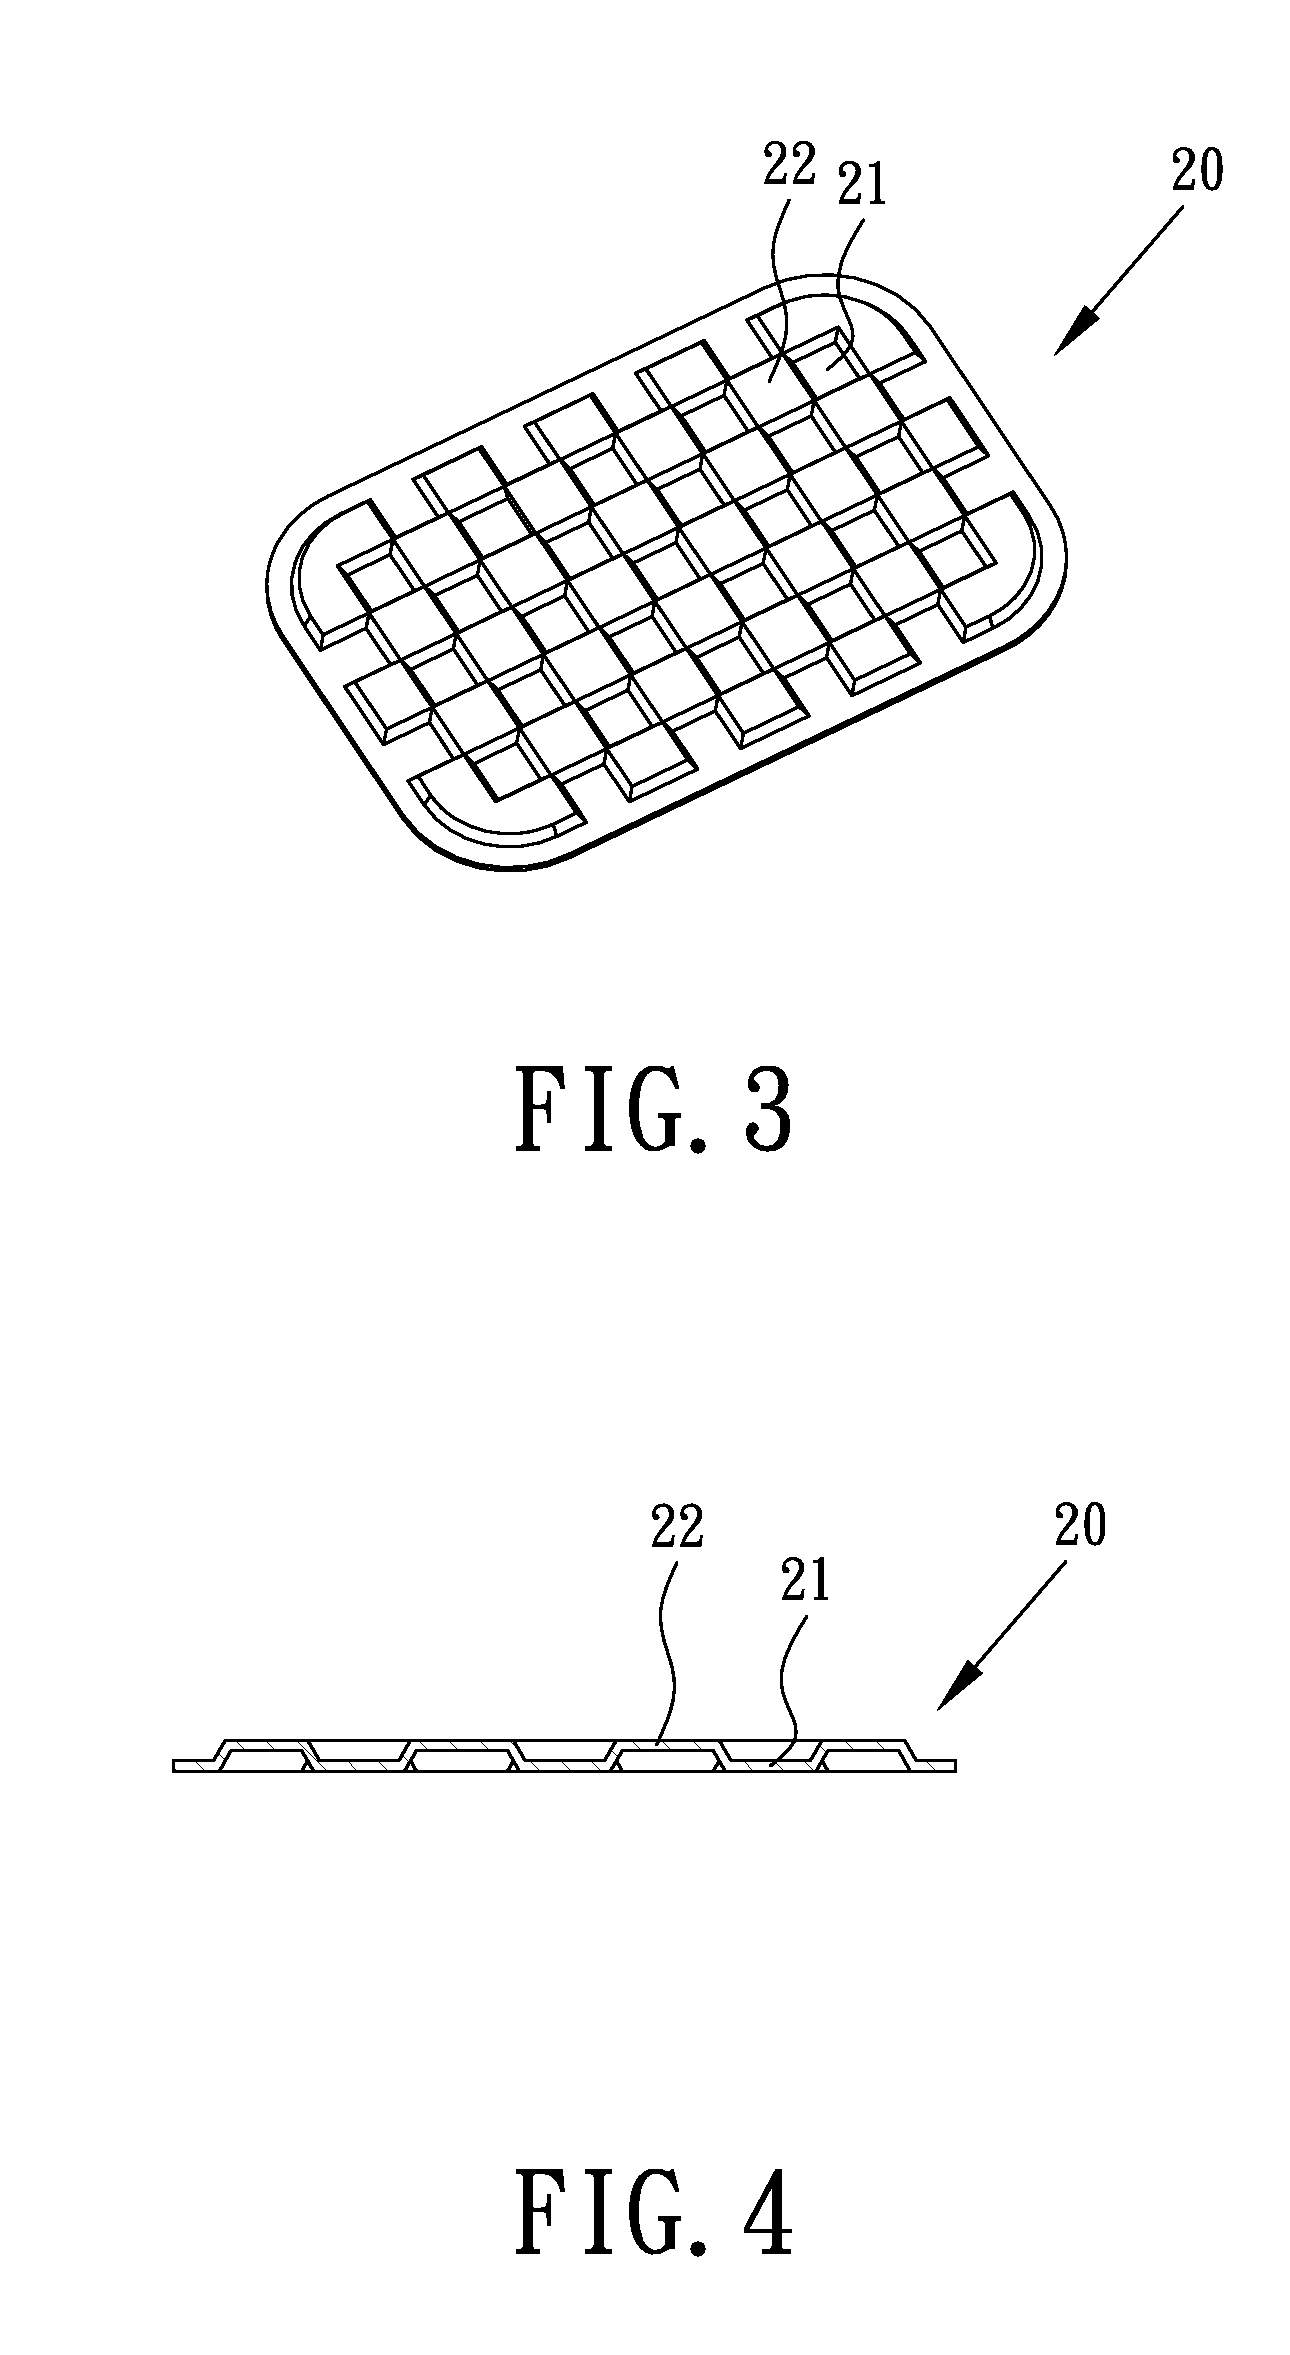 Diaphragm and Electrical-Acoustic Transducer having the same